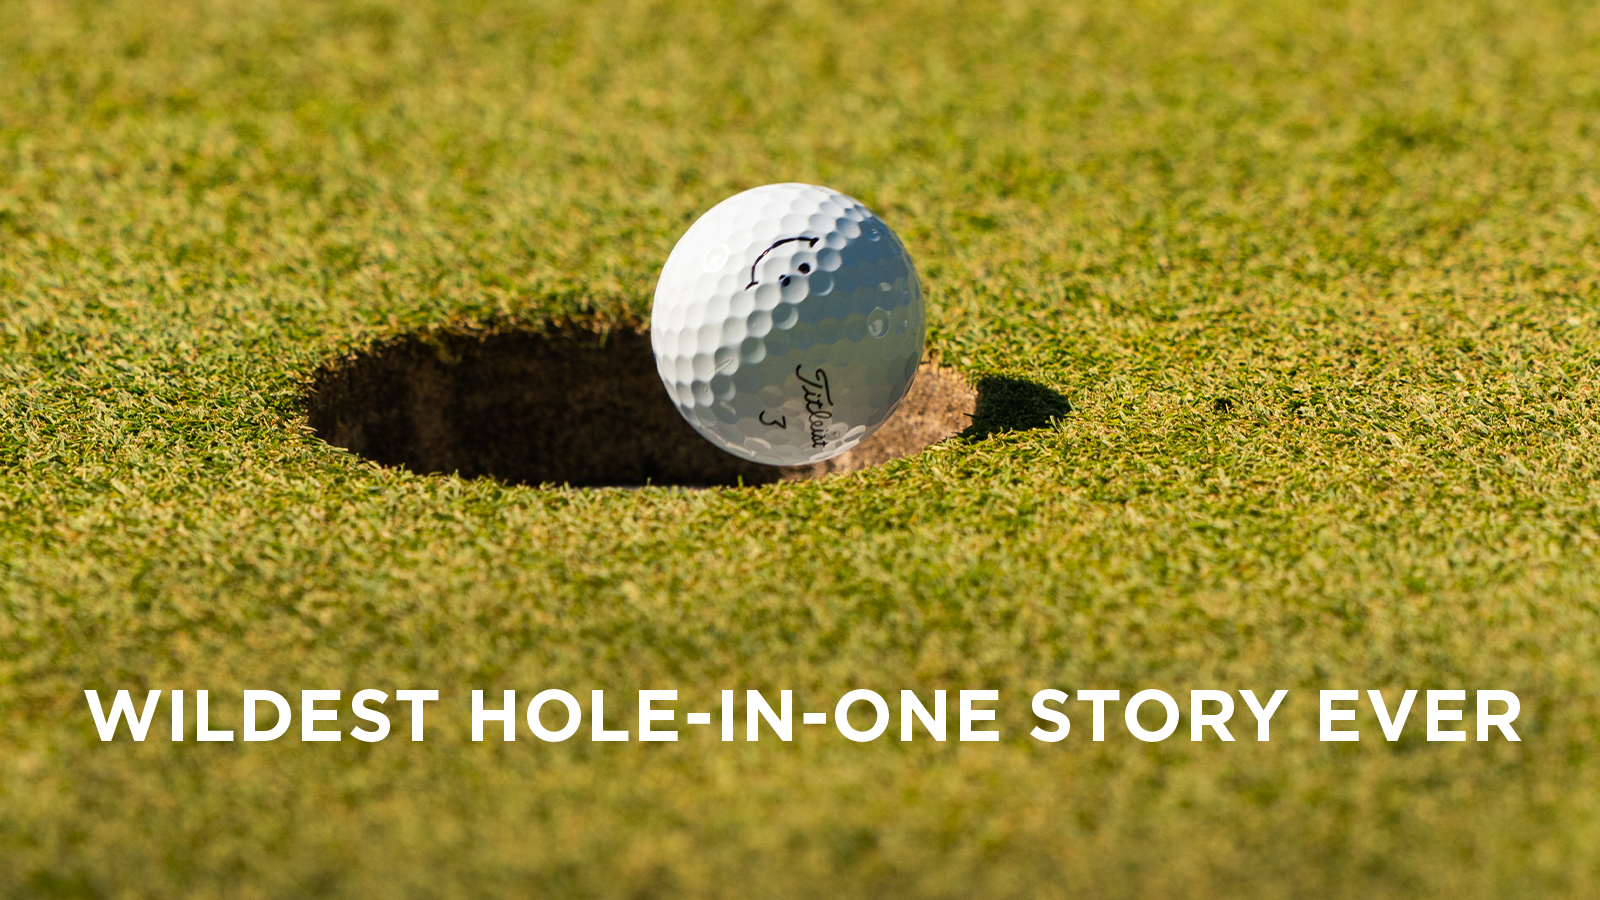 Hole-in-One Story is Almost Too Crazy Believe